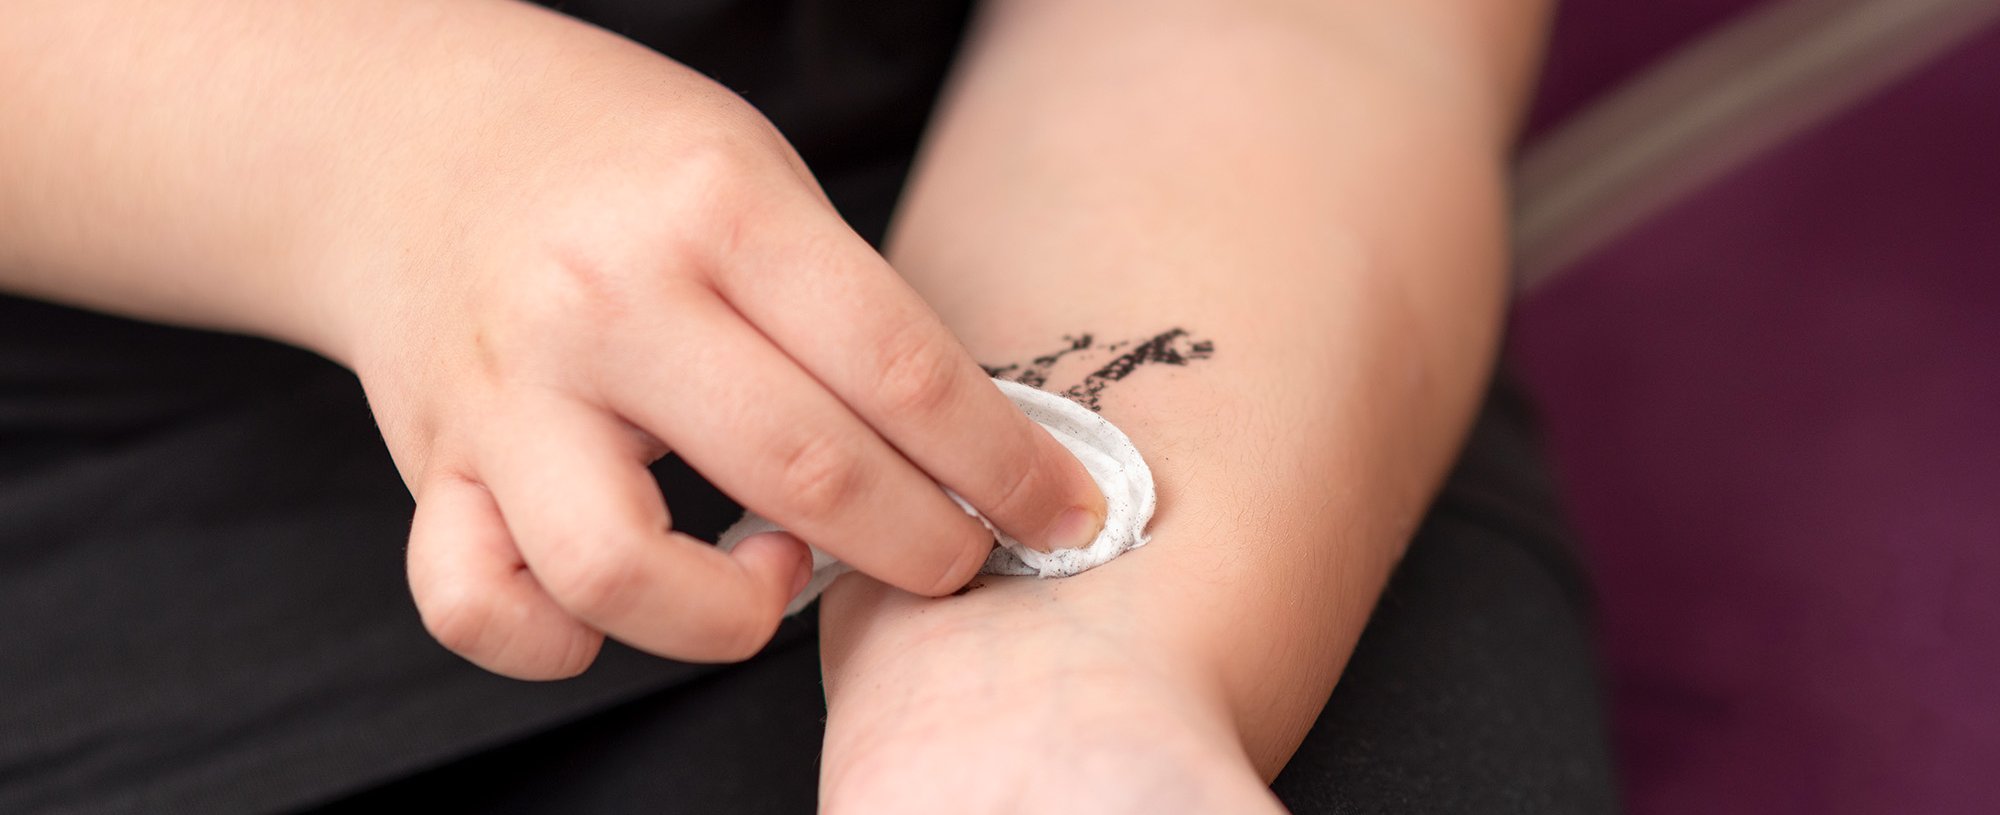 How to Apply and Remove Temporary Tattoos - L'Oréal Paris